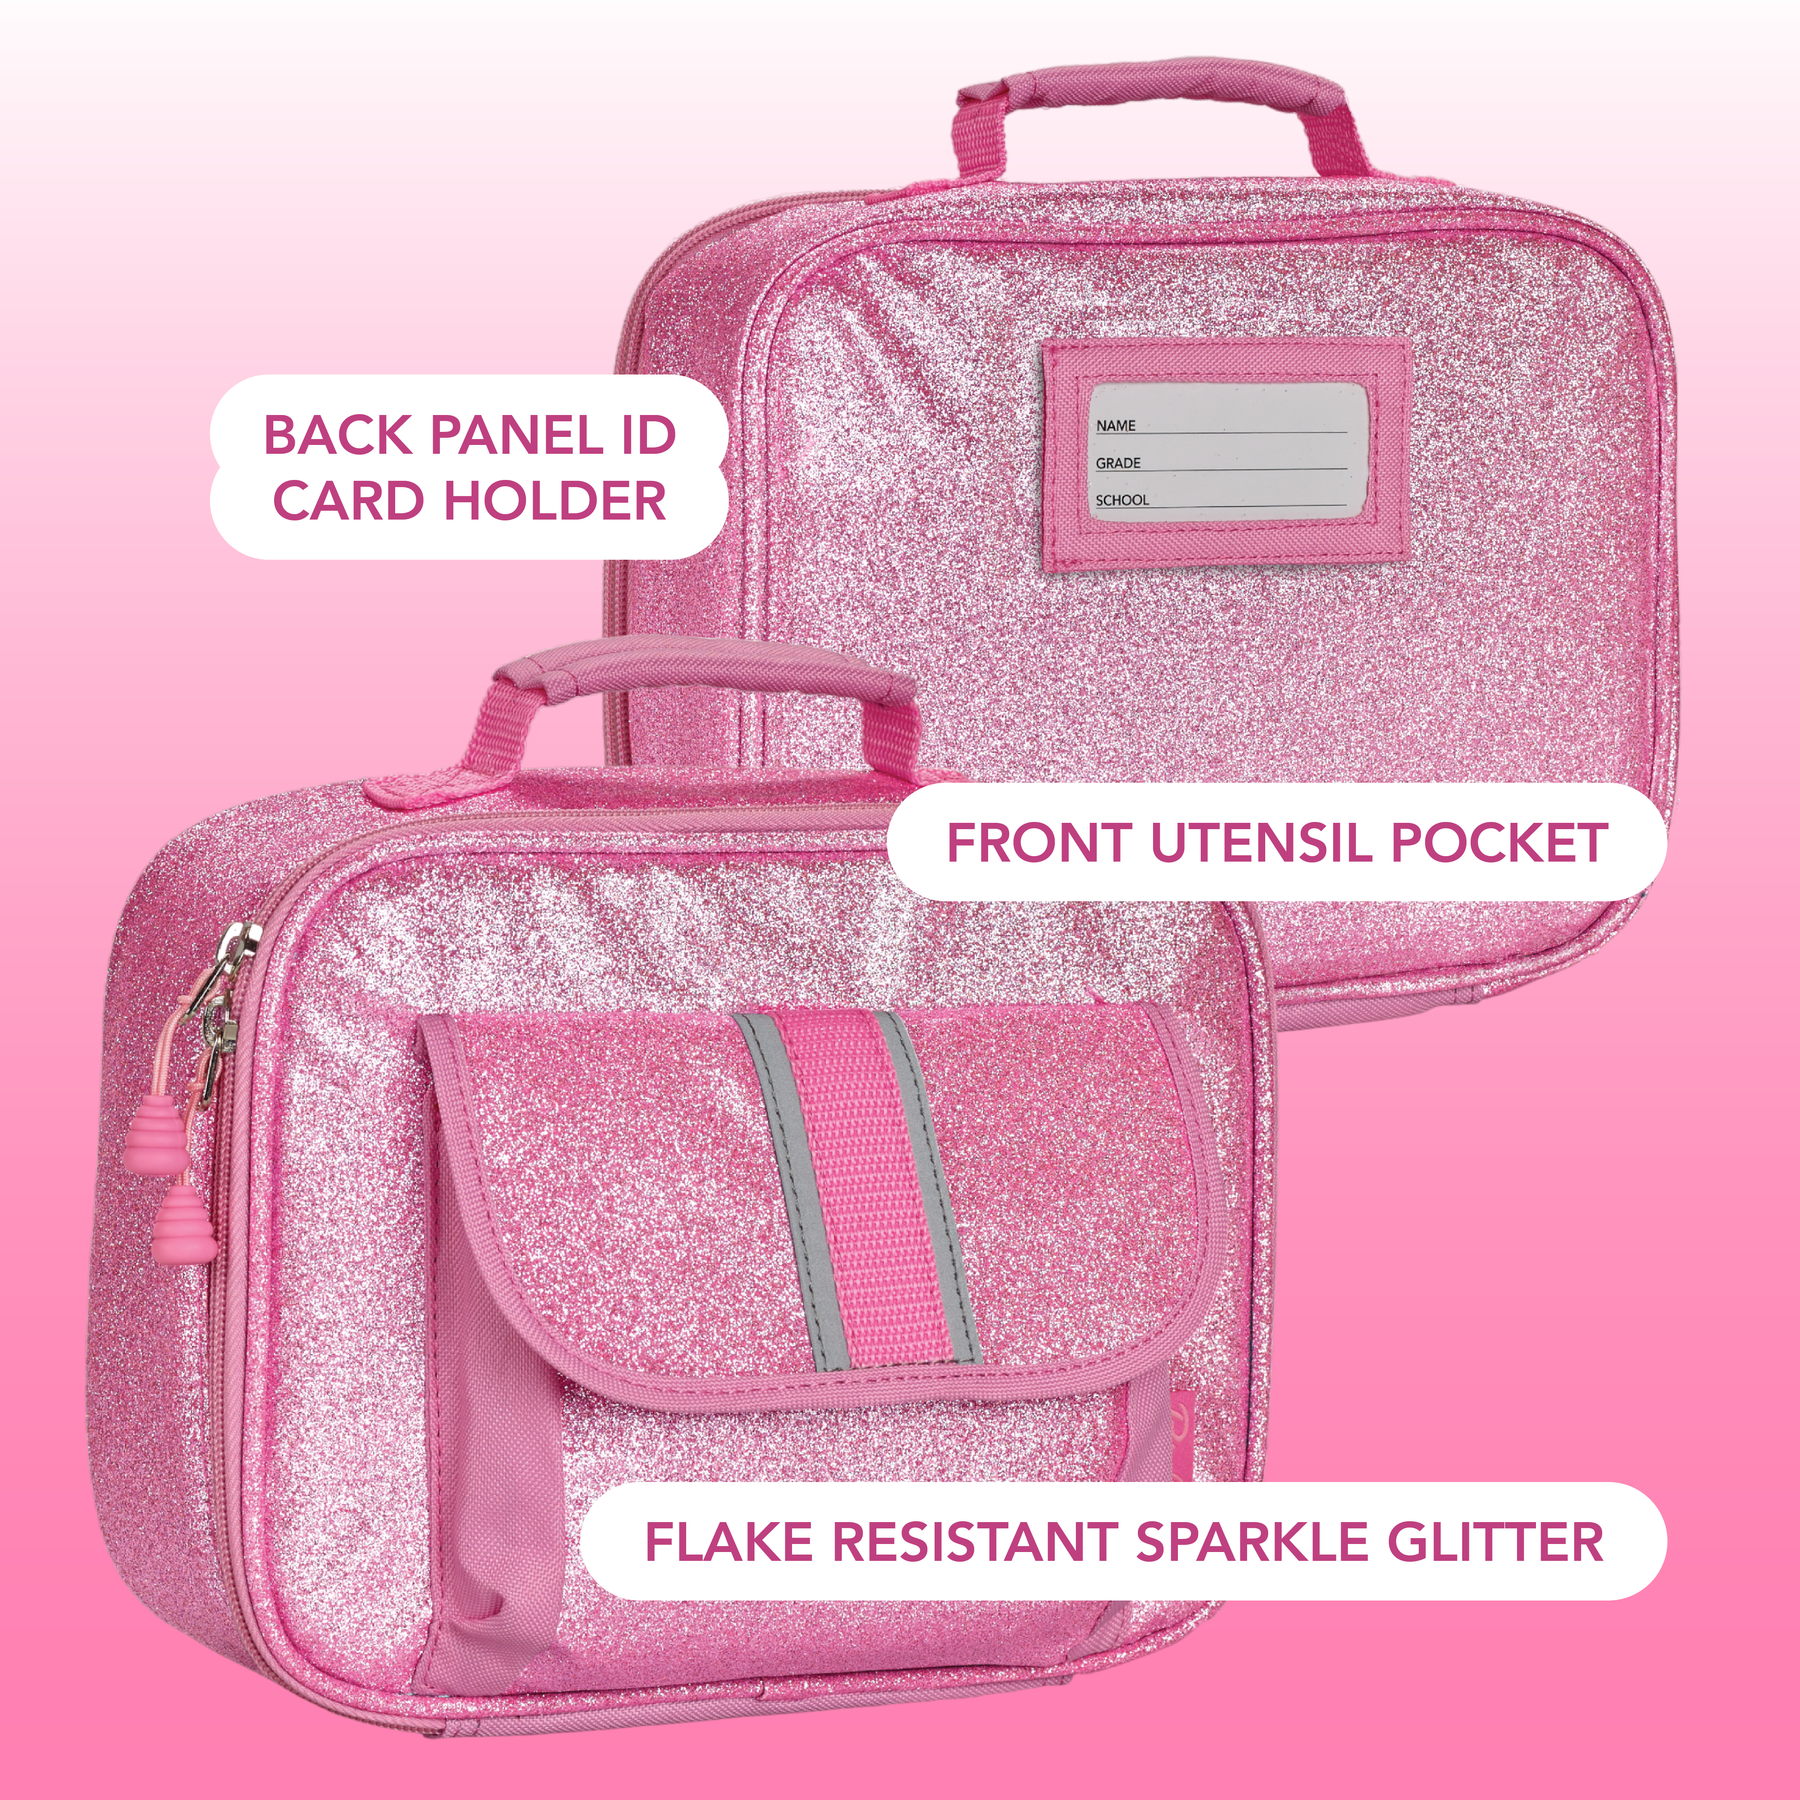 Gear-Up Neon Pink Solid Lunch Box